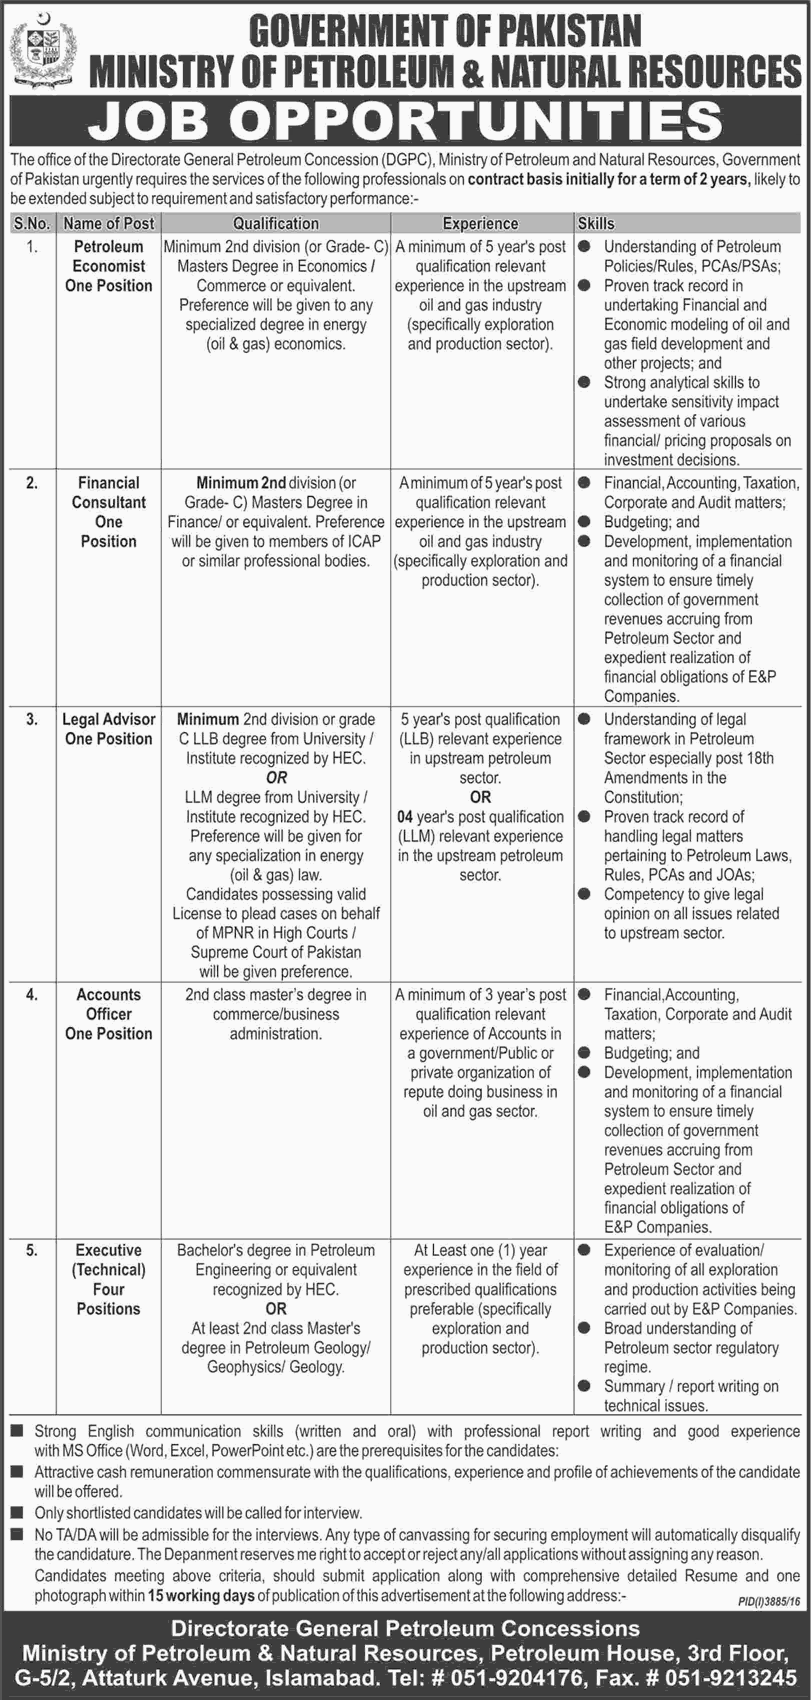 Ministry of Petroleum and Natural Resources Pakistan Jobs 2017 Technical Executives & Others MPNR Latest